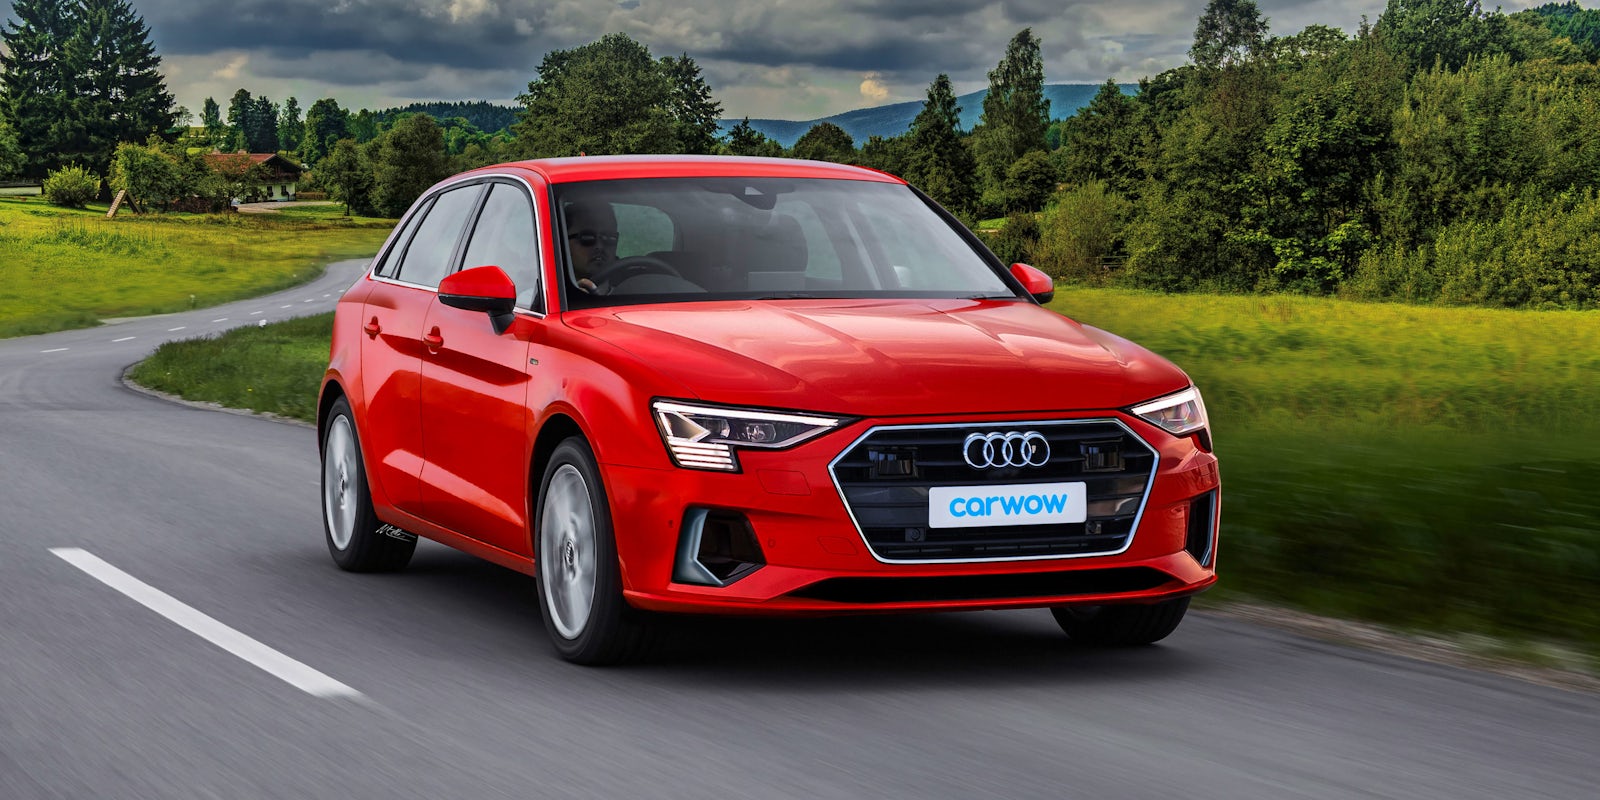 2020 Audi A3 Sportback Price Specs And Release Date Carwow